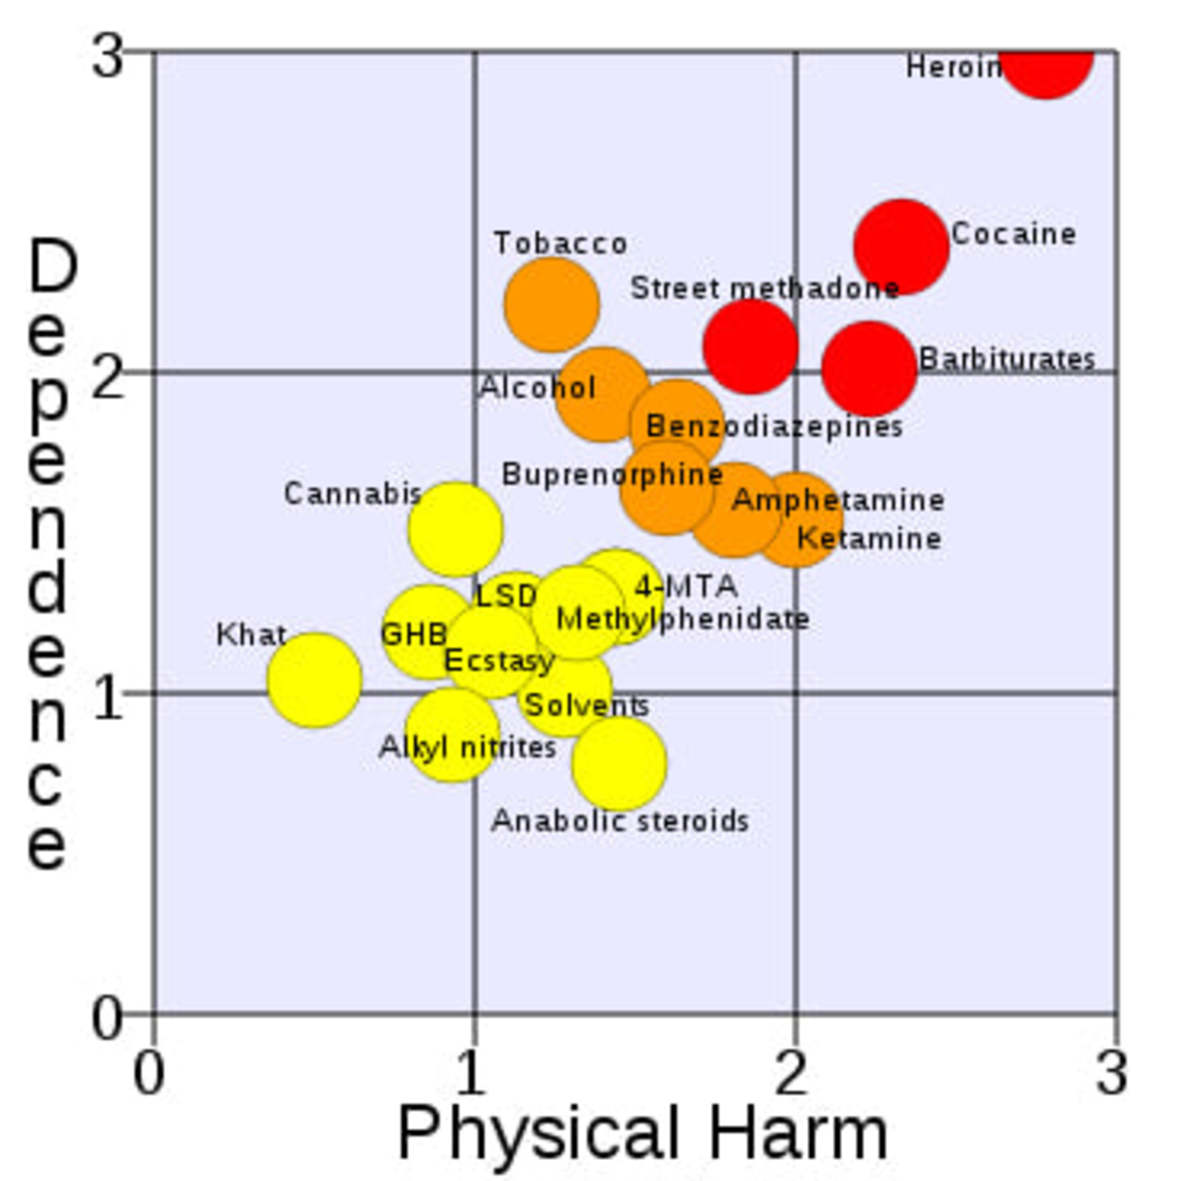 The abstinence verses the harm reduction model of addiction treatment contrasted